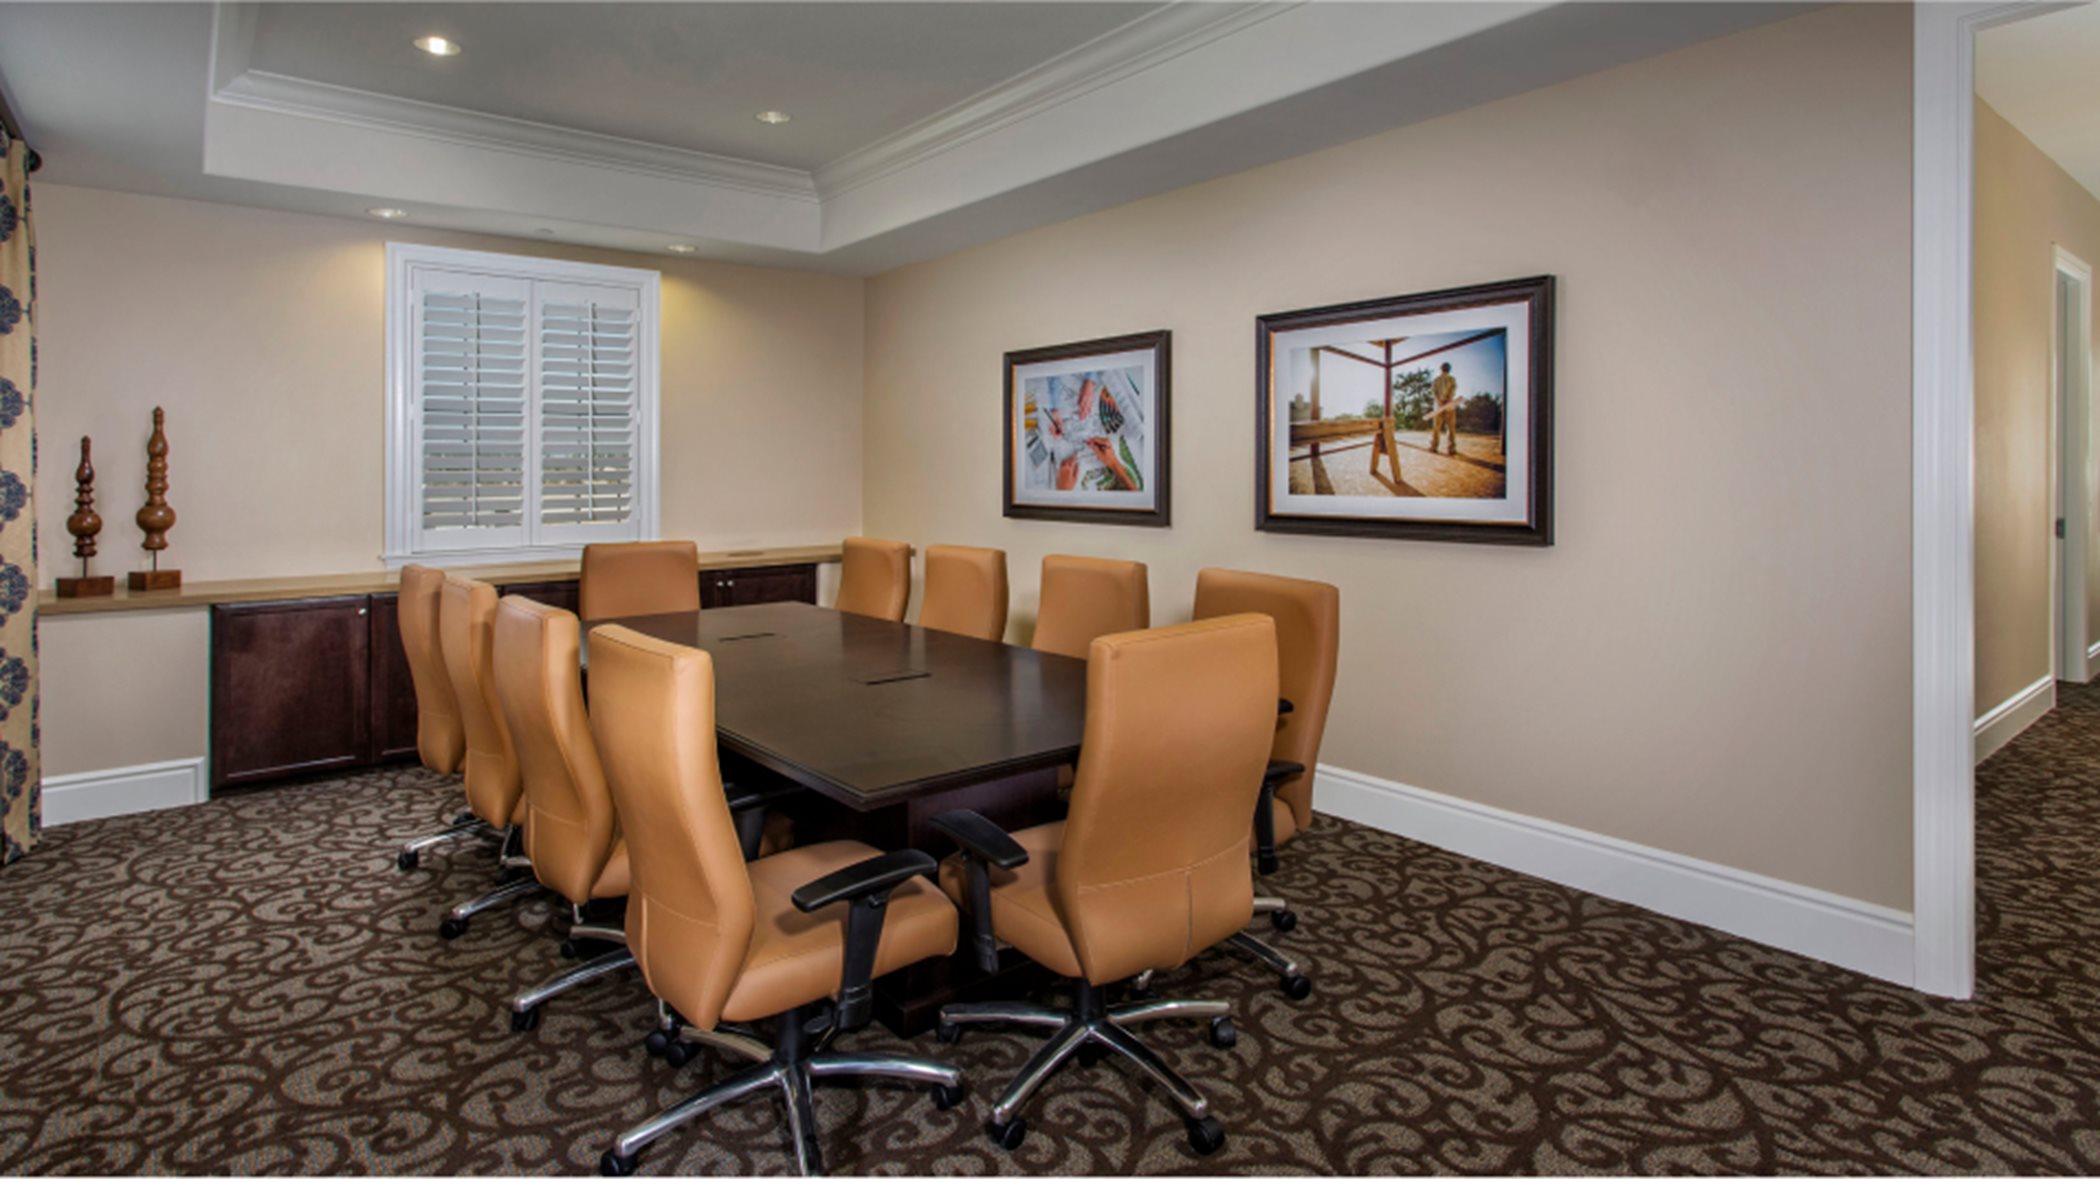 Conference room with a long table and swivel chairs